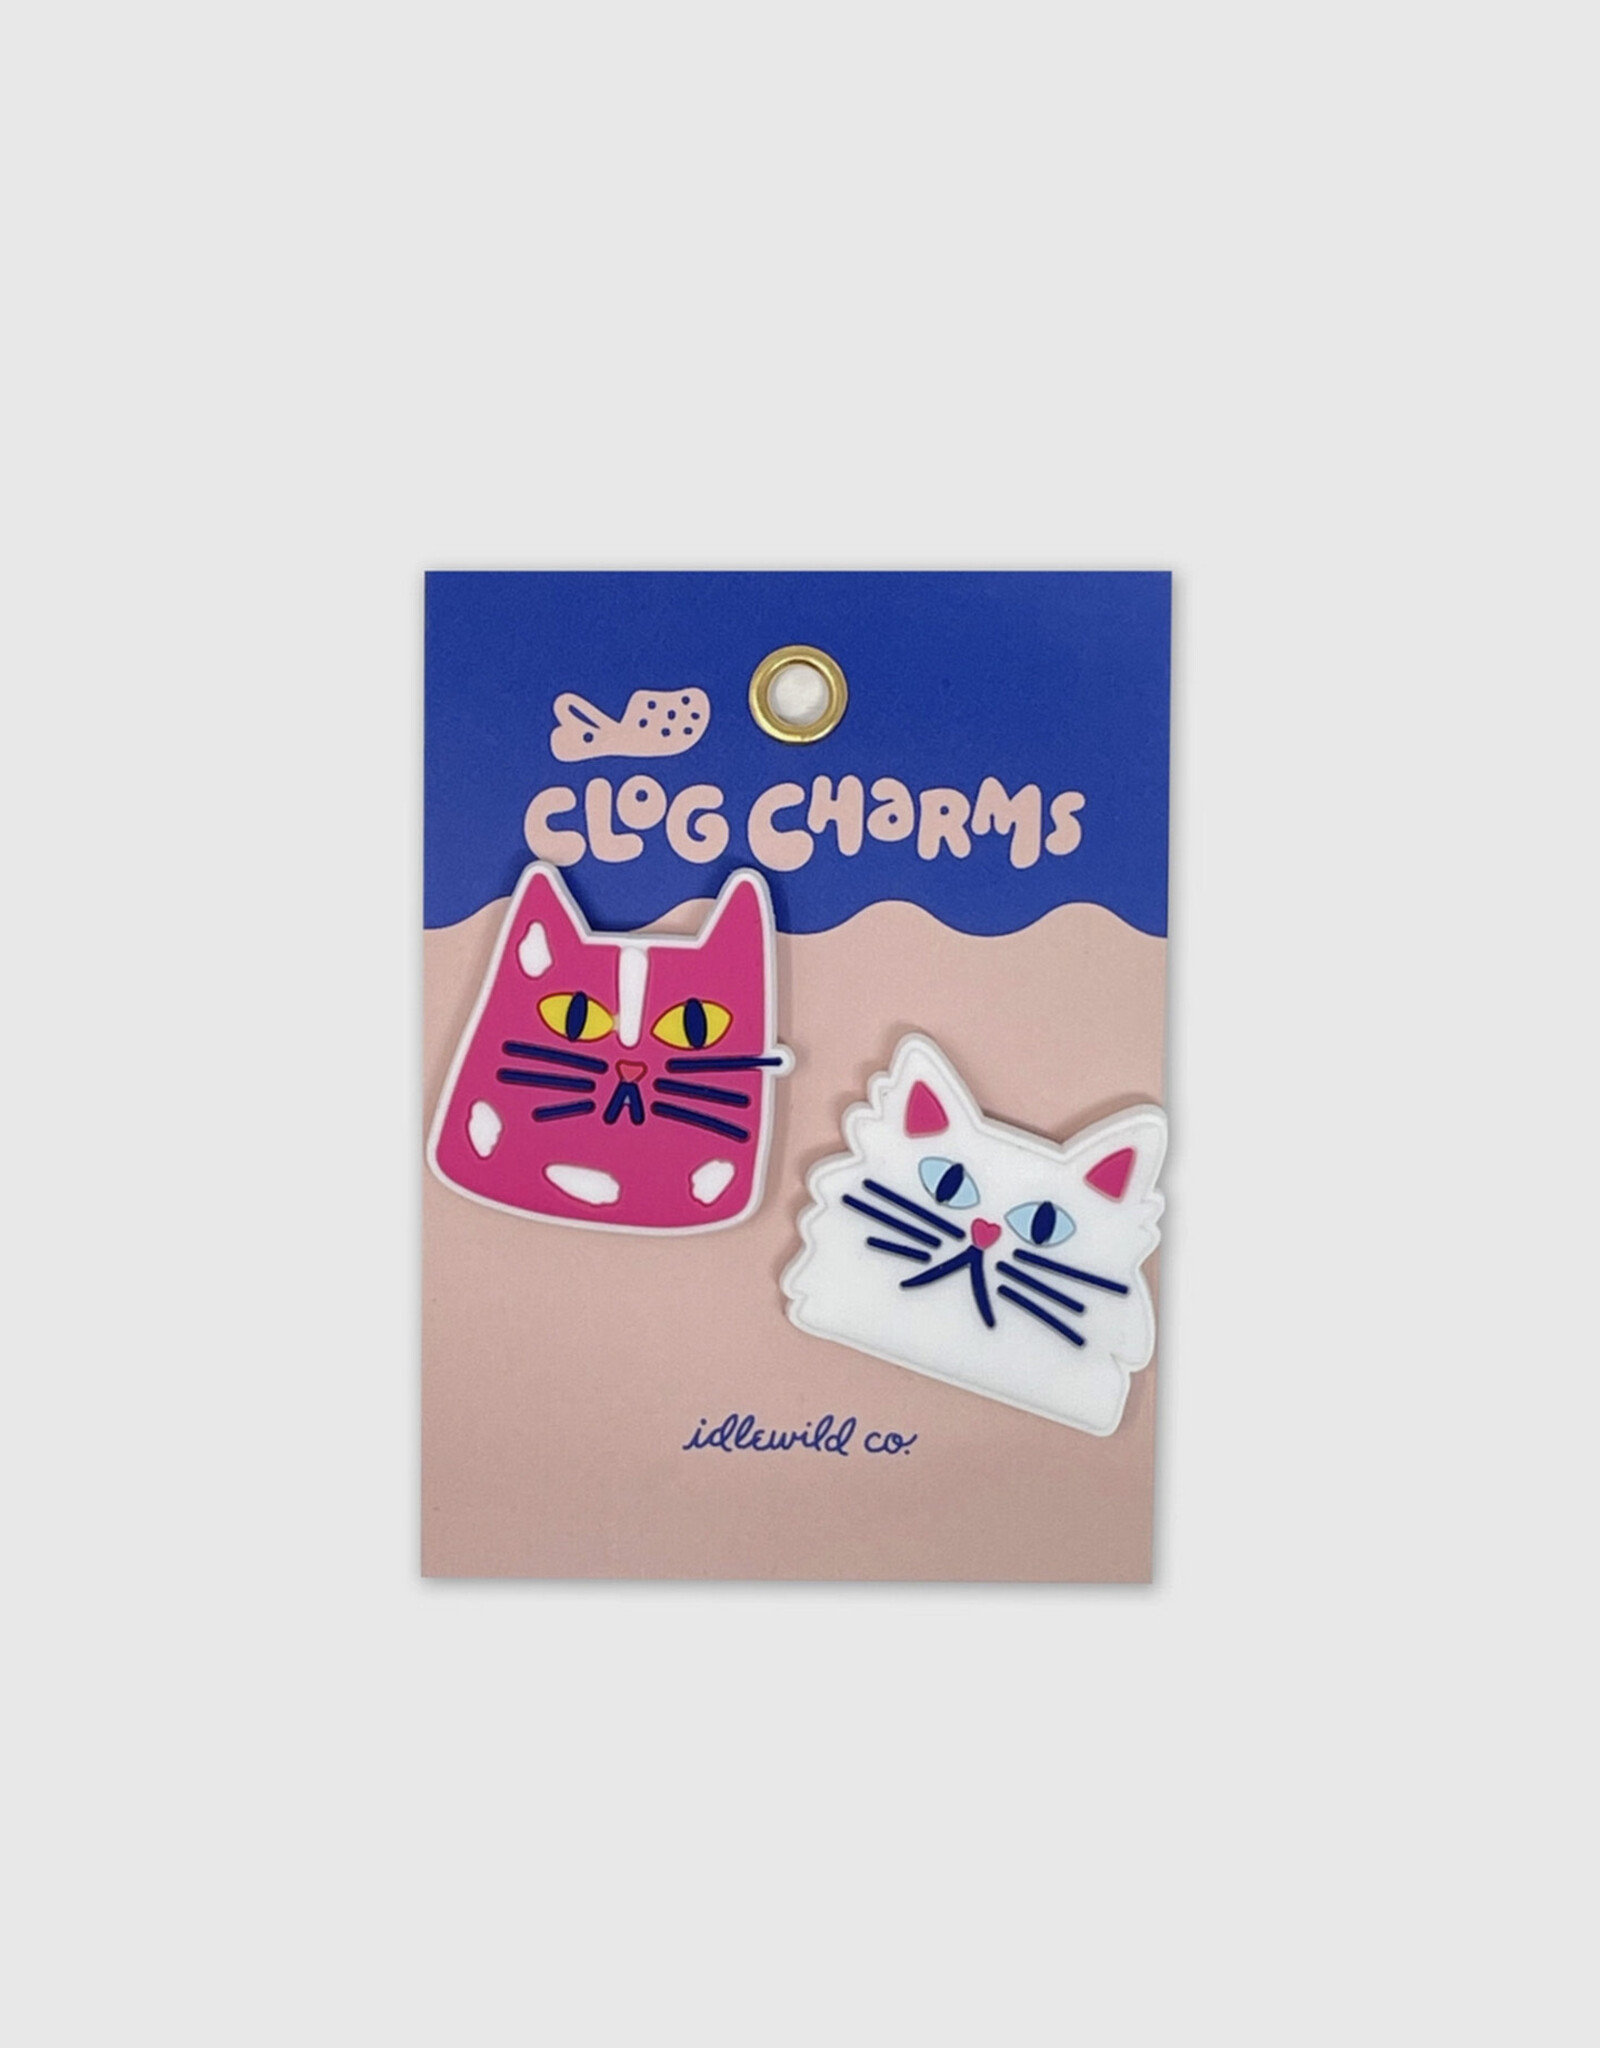 Cat Clog Charms